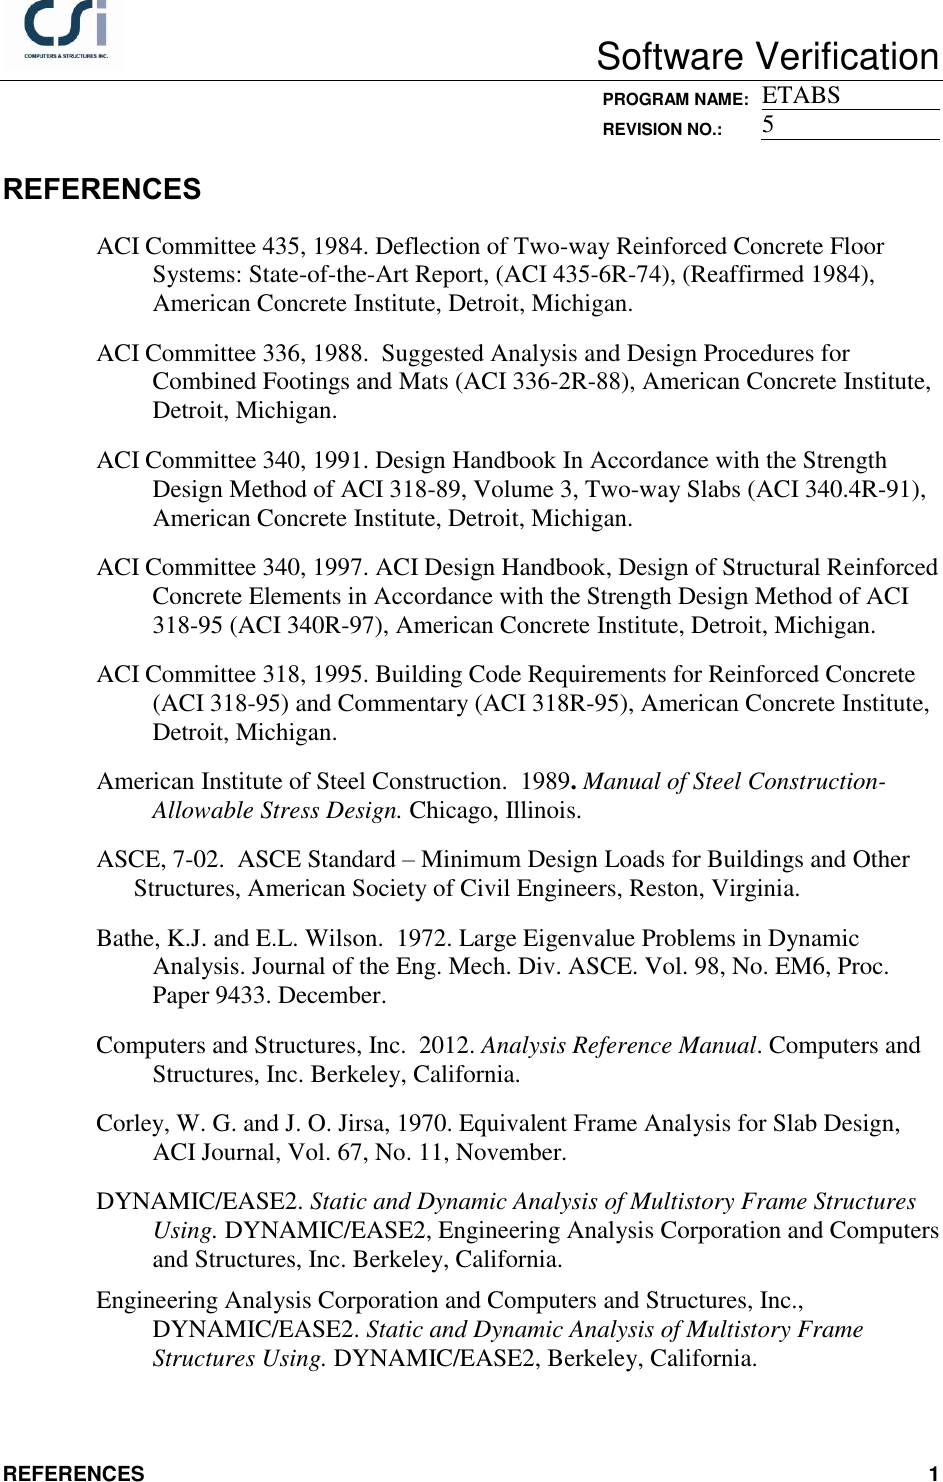 Page 1 of 3 - Contents References